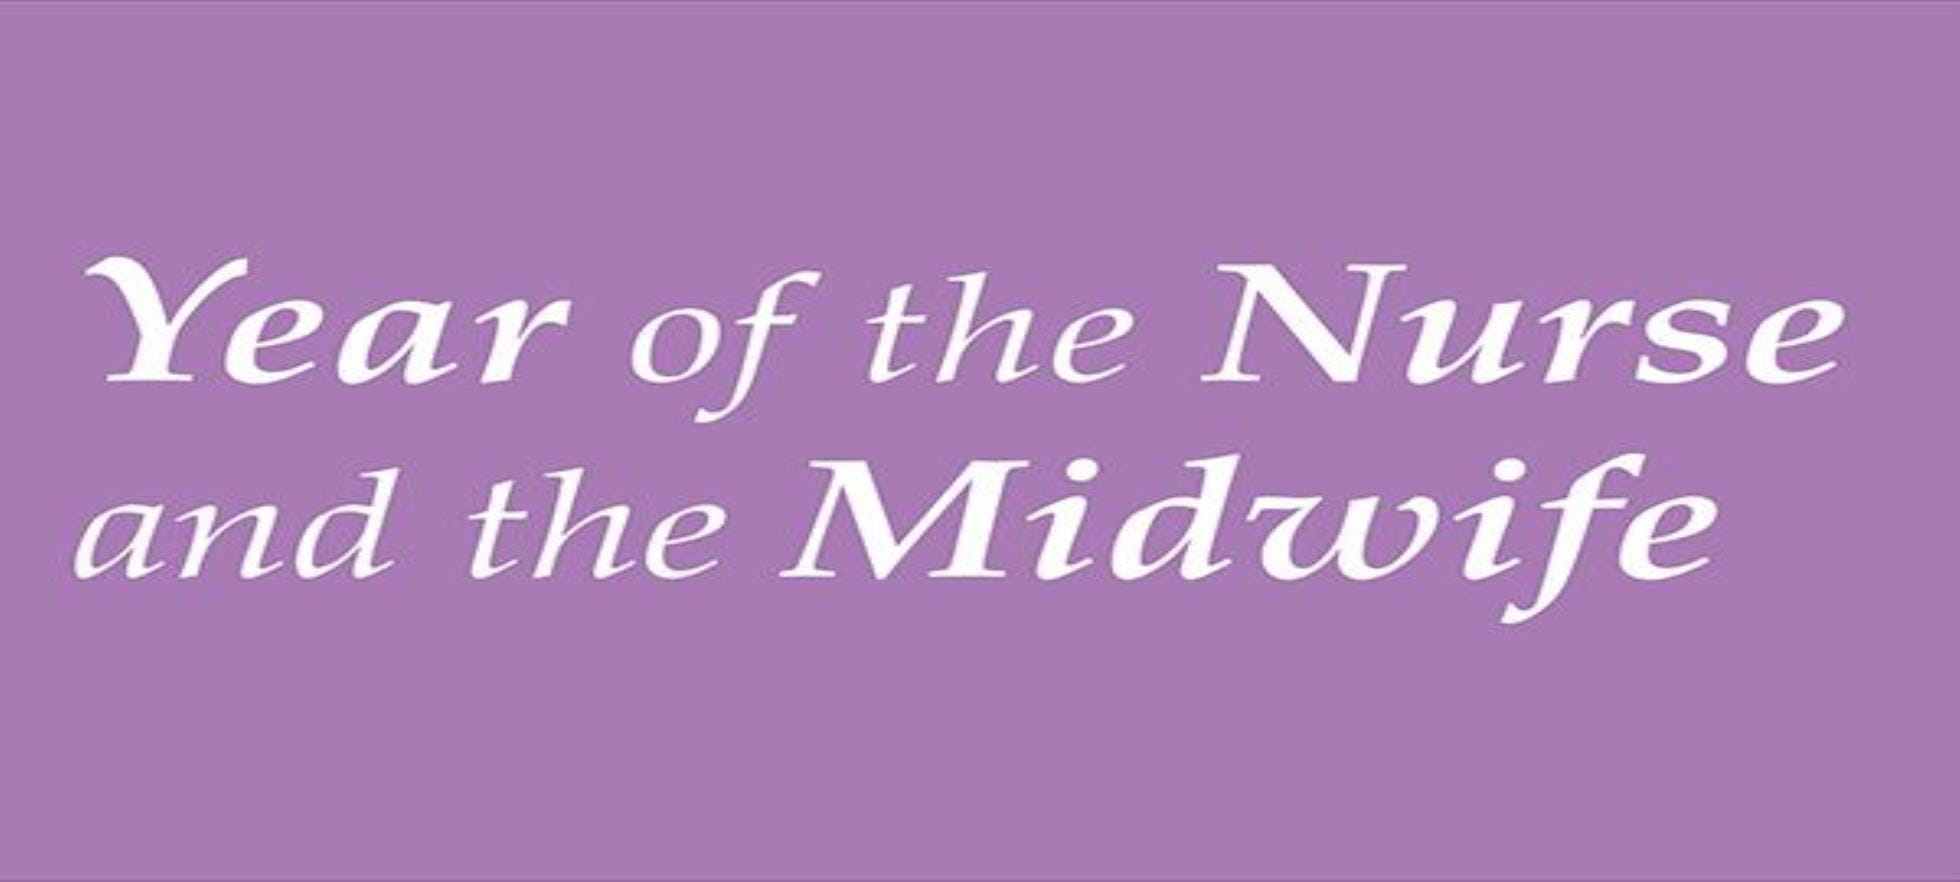 Year of the Nurse and the Midwife